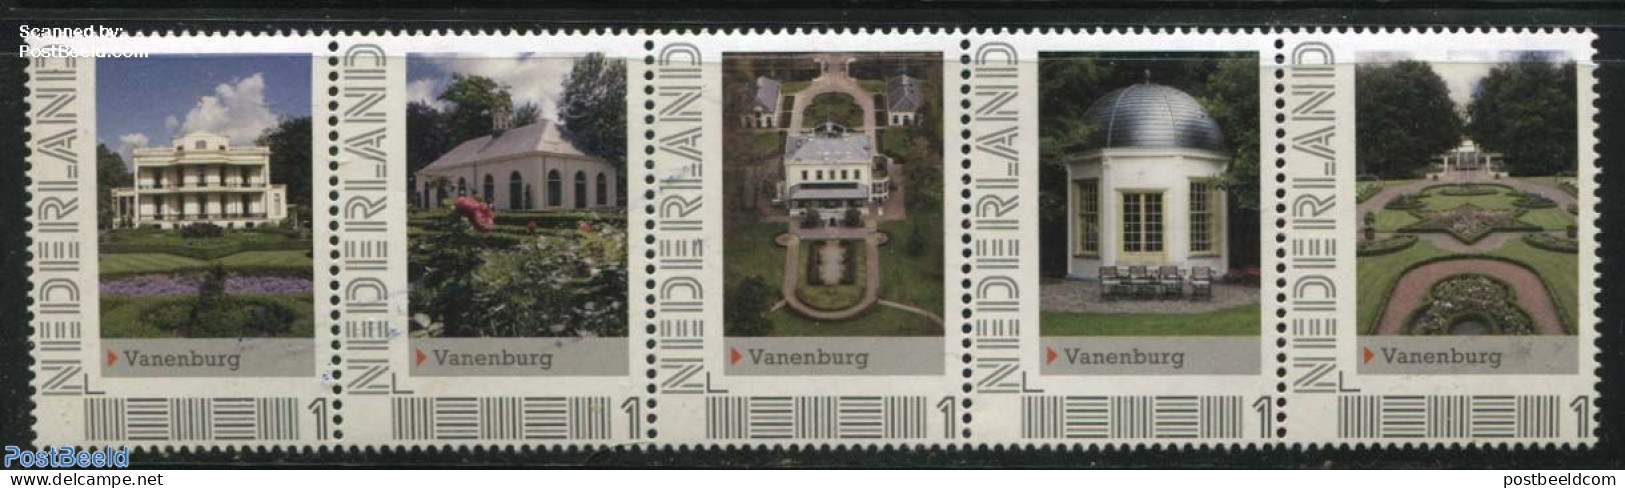 Netherlands - Personal Stamps TNT/PNL 2012 Vanenburg 5V [::::], Mint NH, Nature - Trees & Forests - Castles & Fortific.. - Rotary, Lions Club